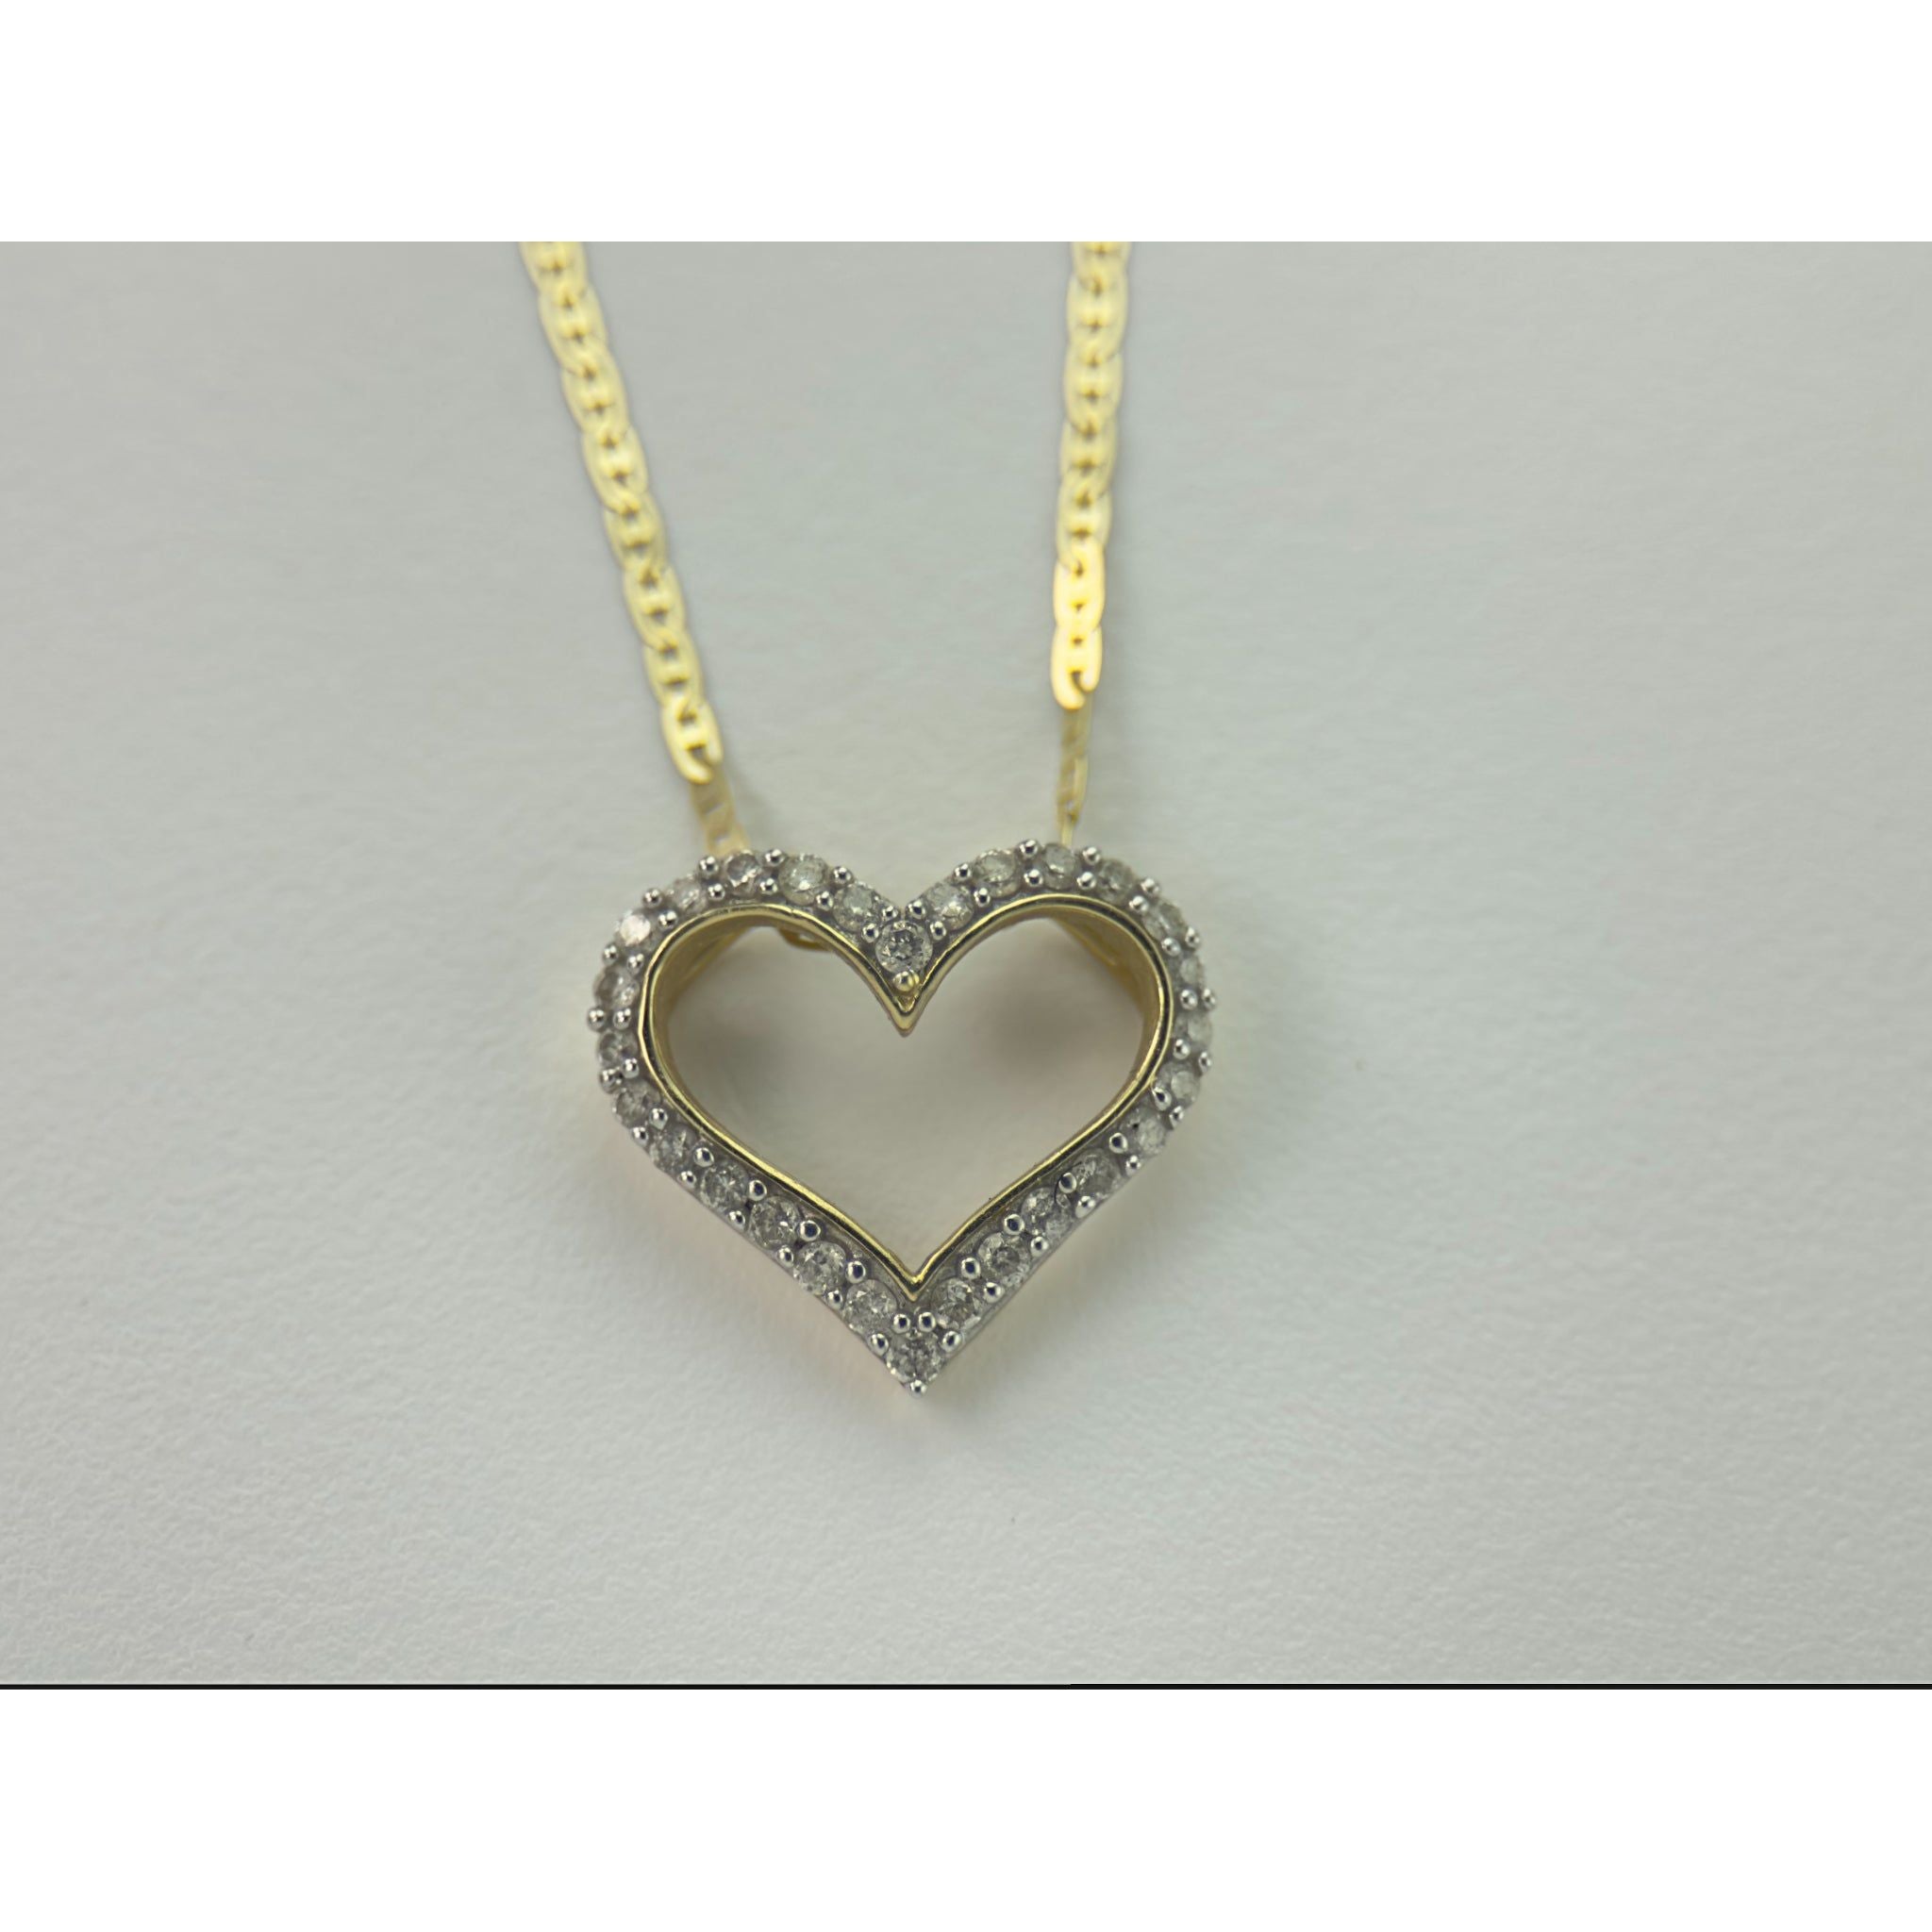 DR2202 - 10K Yellow Gold - Diamond - Pendant and Chain